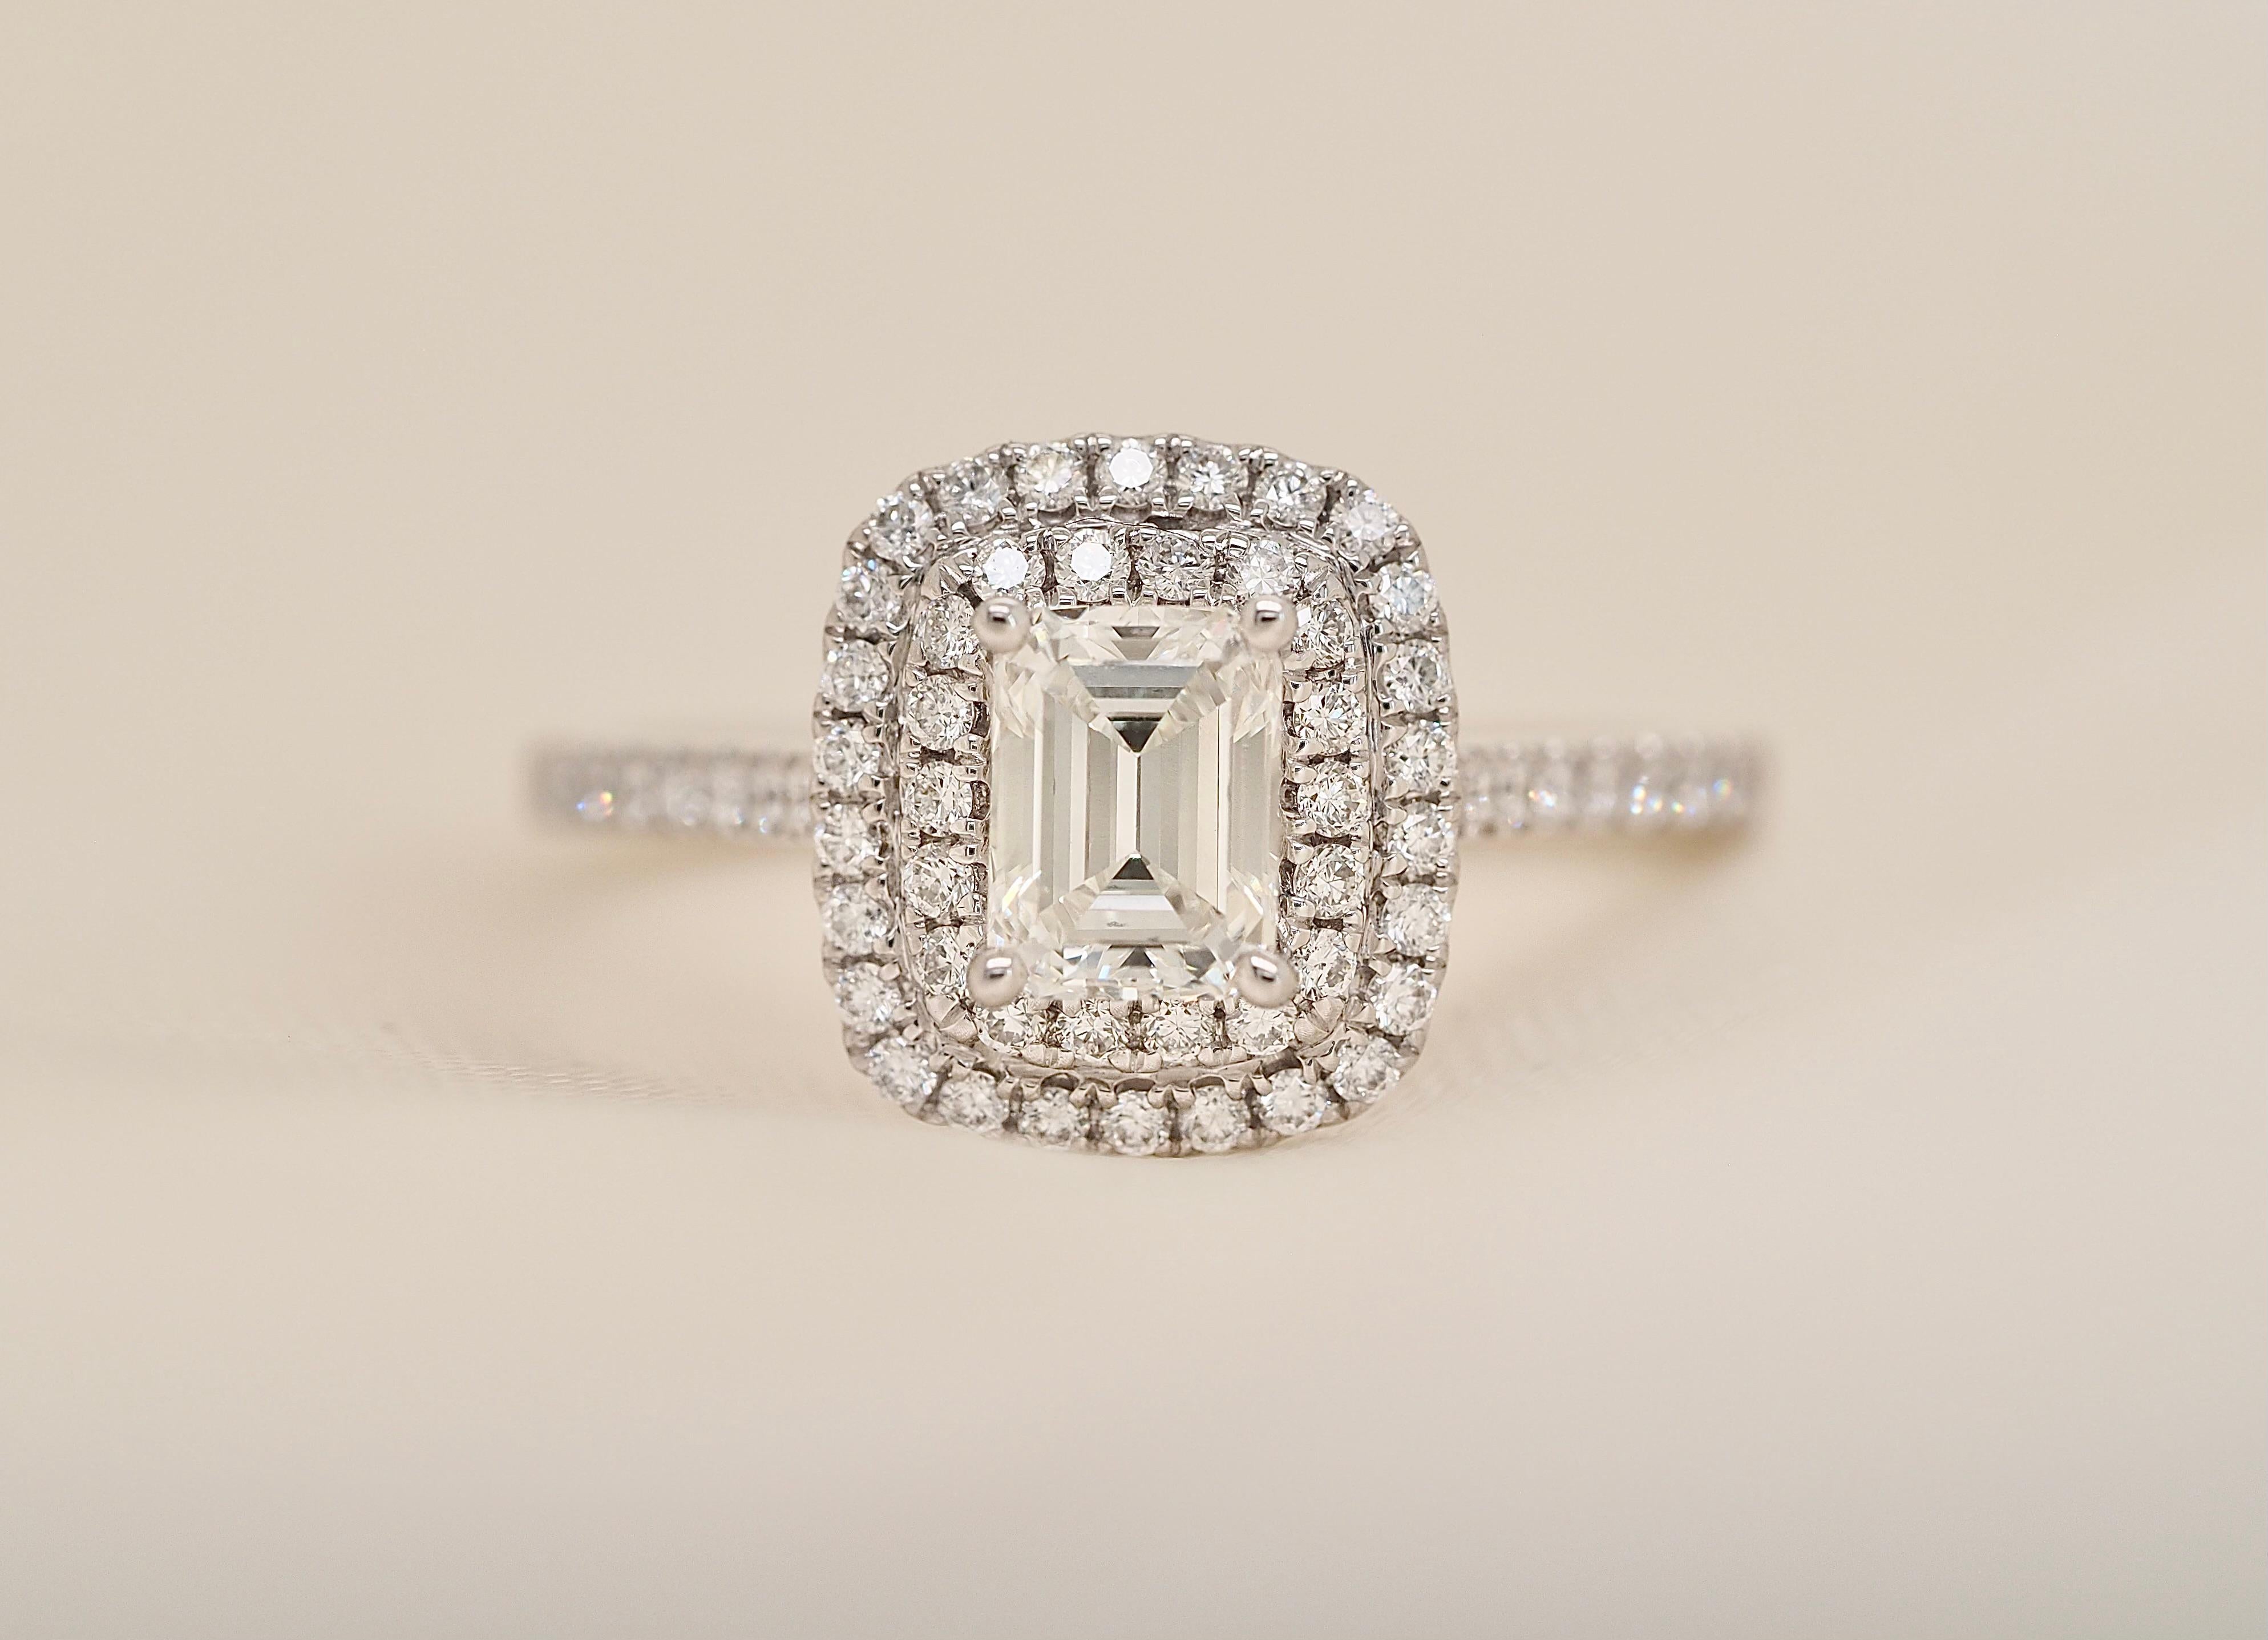 This Beautiful Brand New ring is a 1.09CTW Emerald Cut Diamond Double Halo Engagement Ring in 14k White Gold. The Center Diamond is a 0.66 carat emerald. With 0.43 Carats of round brilliant cut diamonds accenting down the side and around the